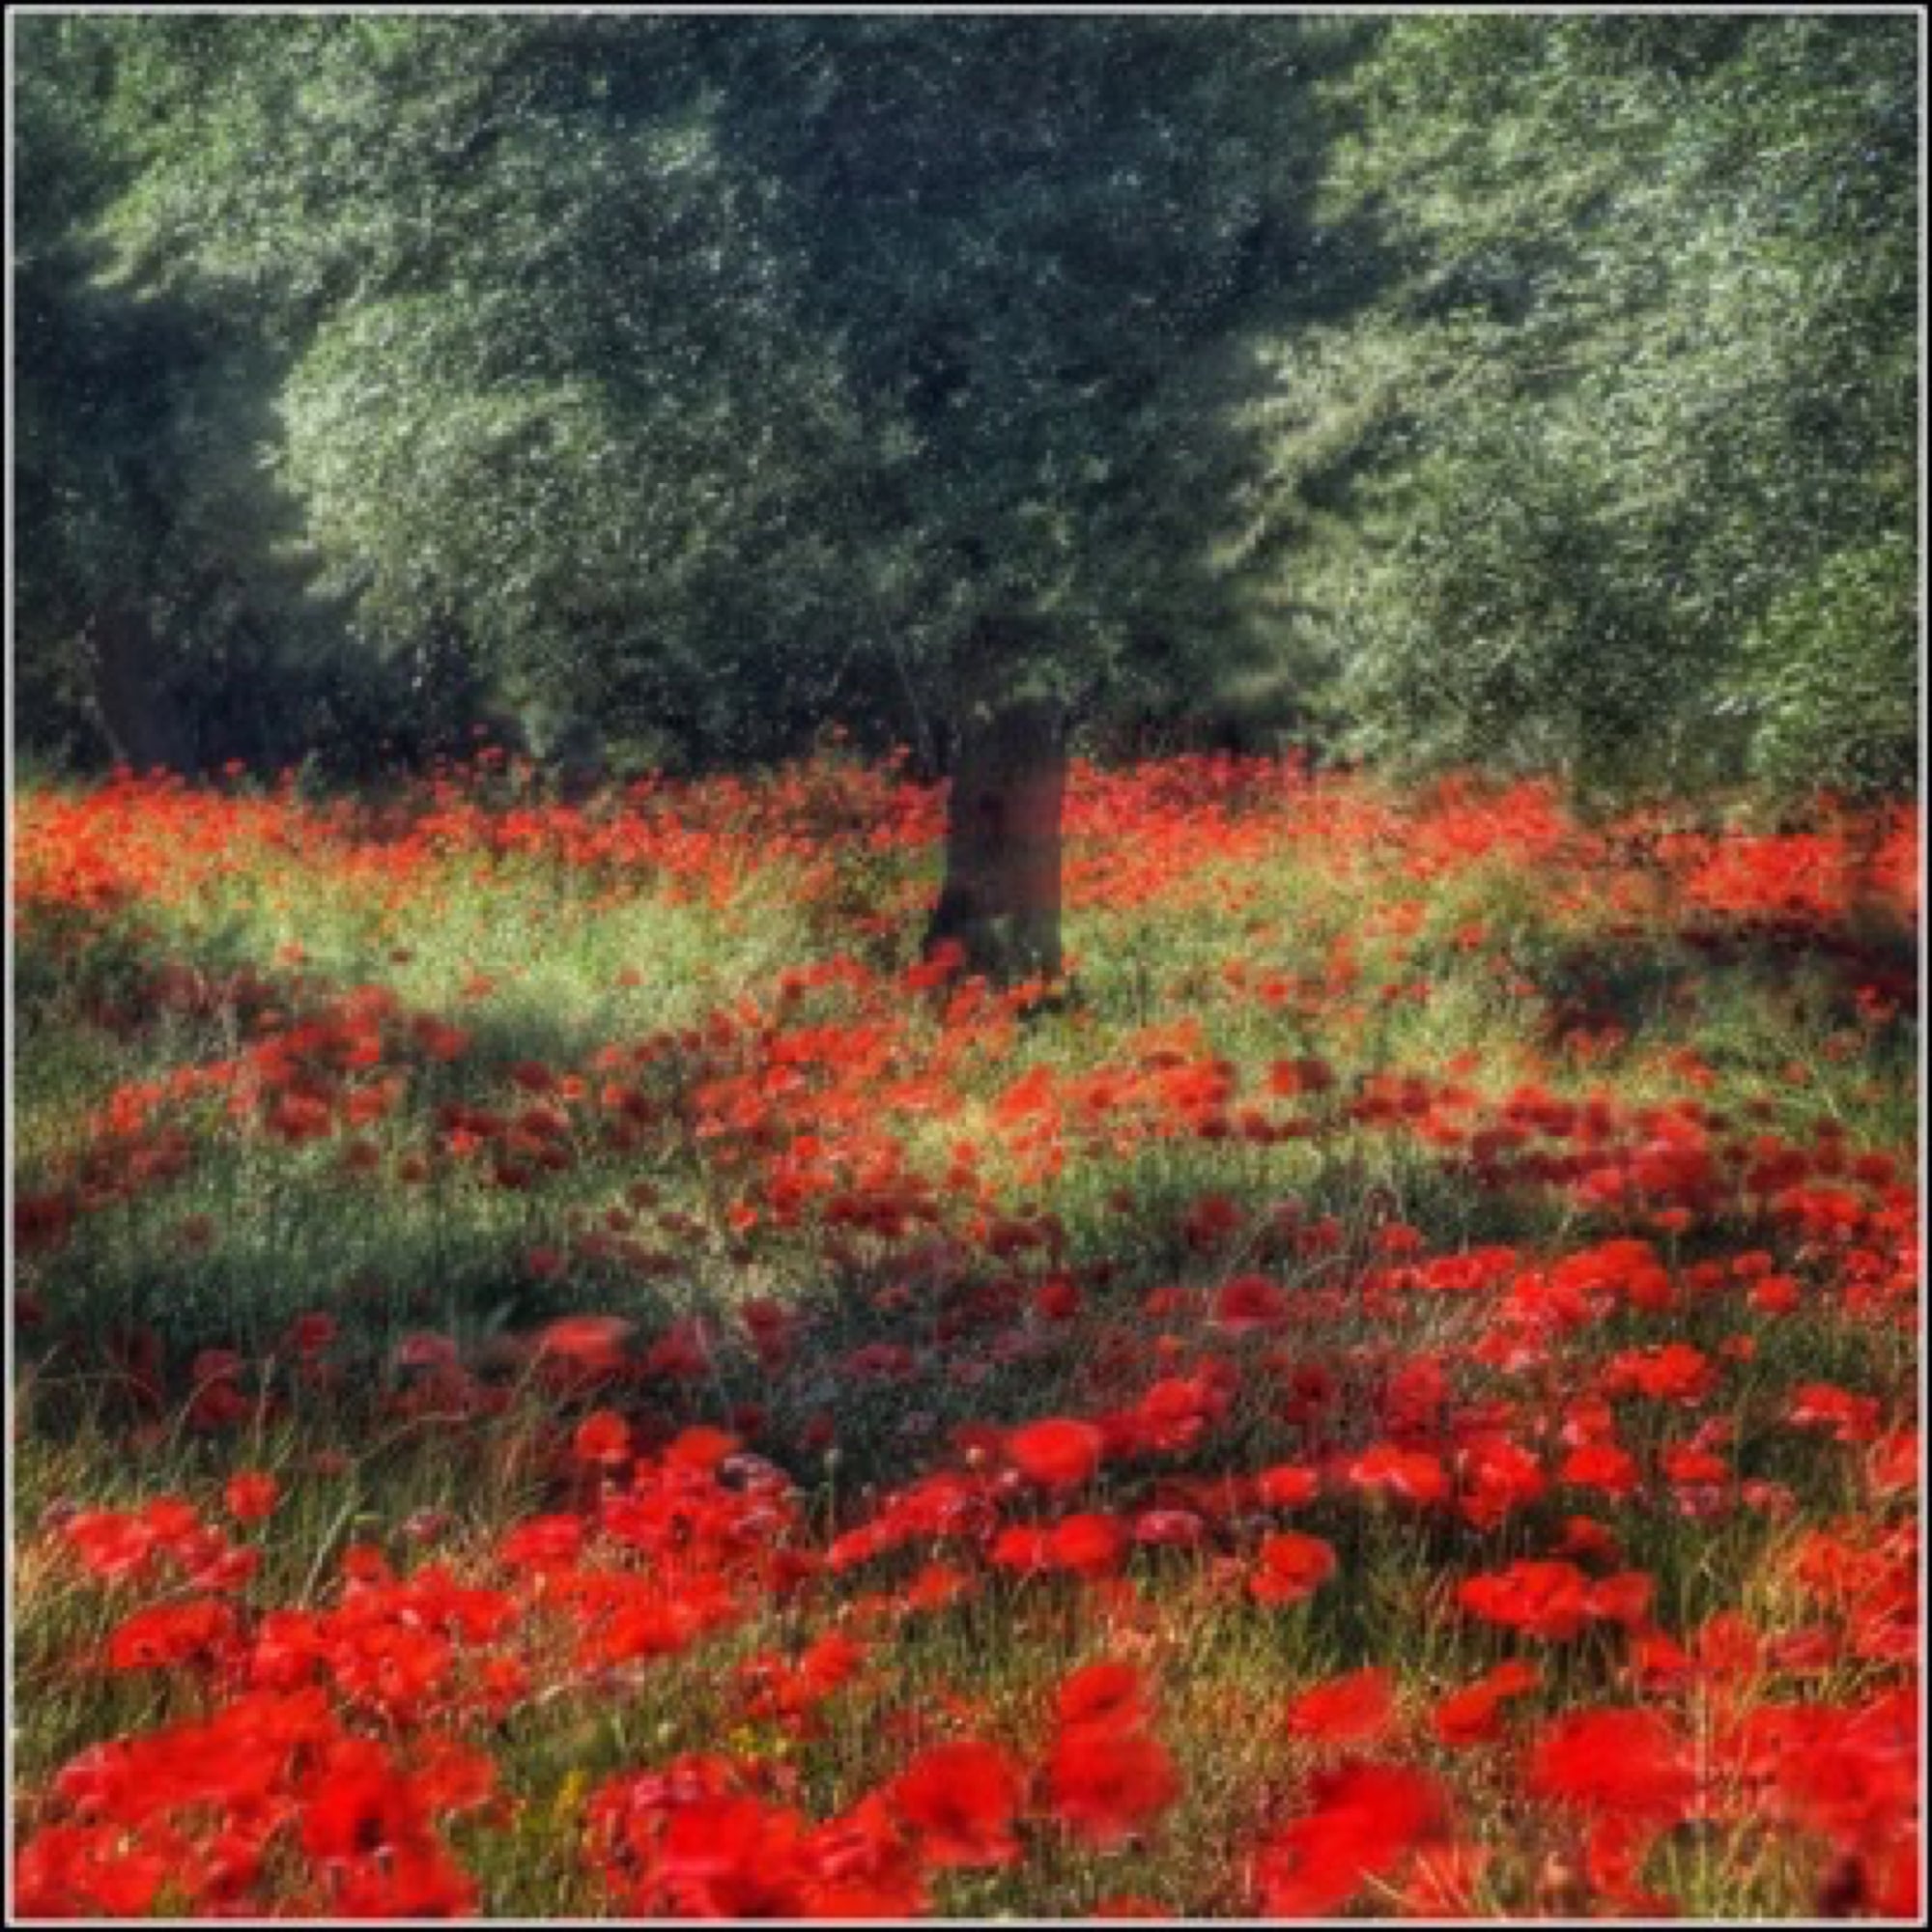 'Summer Poppy Fields': How to turn a photo into an impressionistic painting! - by Thomas Peck